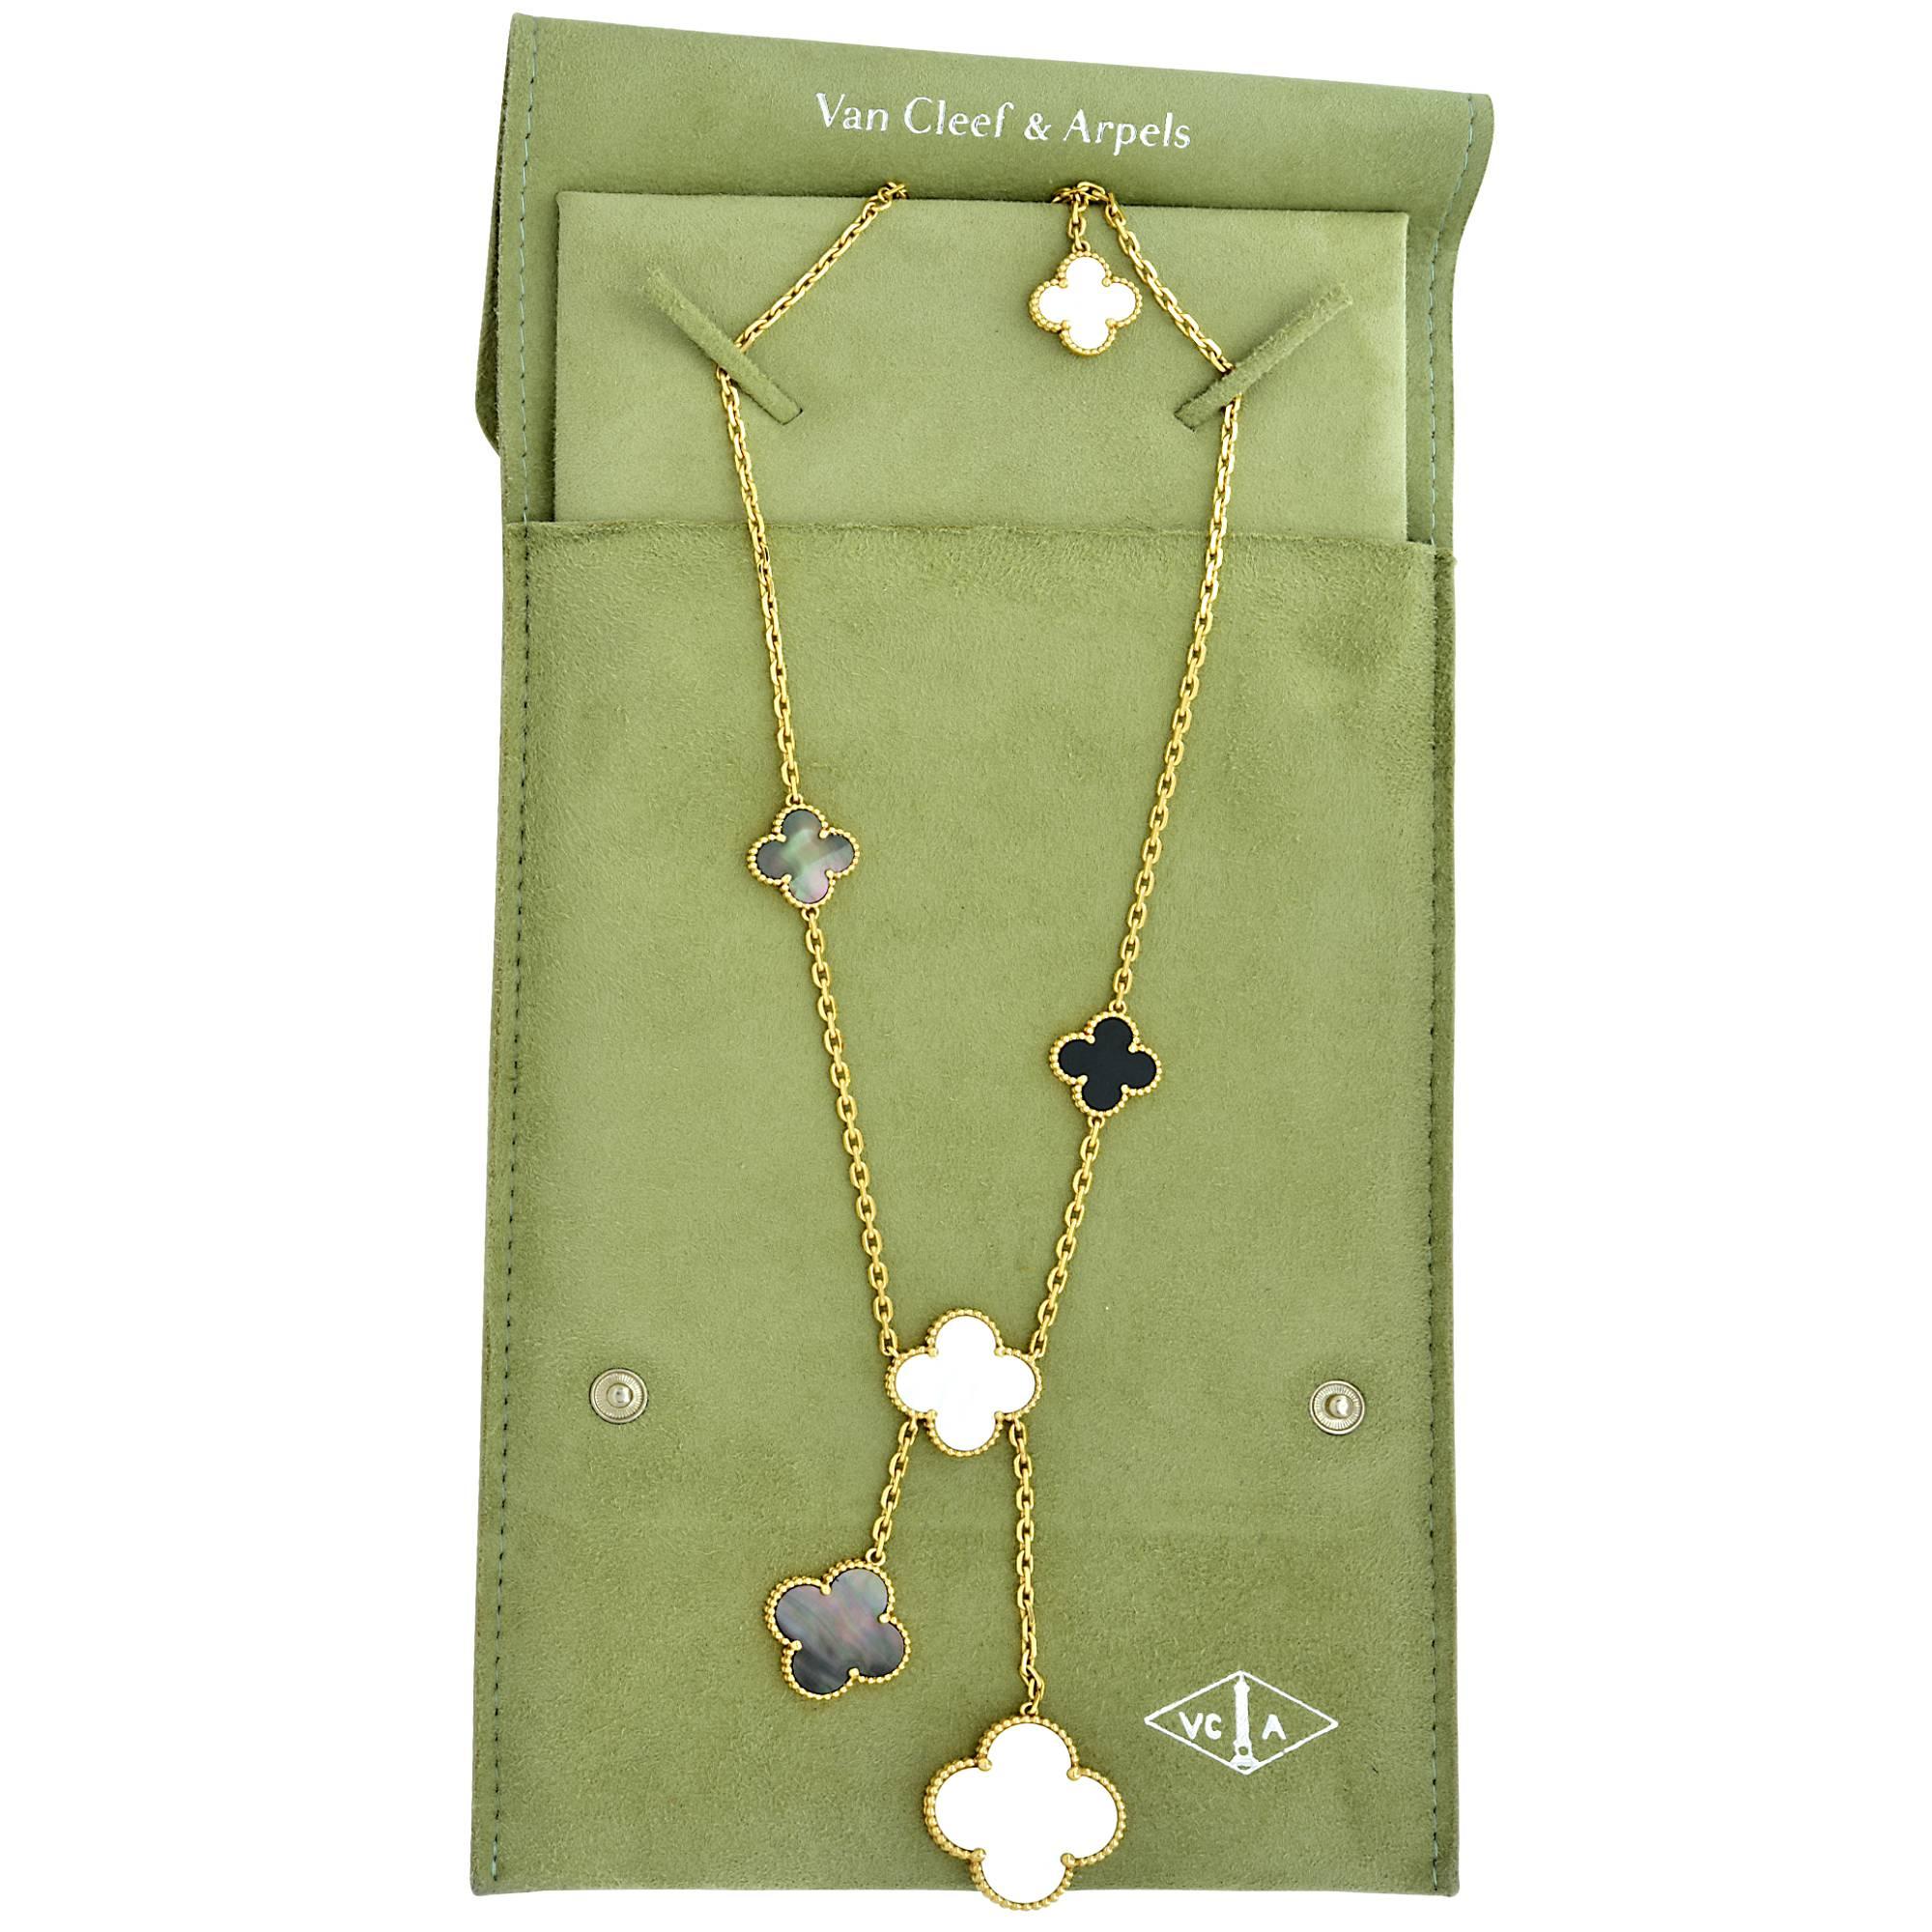 Van Cleef & Arpels 18k yellow gold Alhambra Magic necklace featuring 6 motifs containing mother of pearl, black mother of pearl and onyx.

It is stamped and/or tested as 18k gold.
The metal weight is 25.65 grams.

This VCA necklace is accompanied by